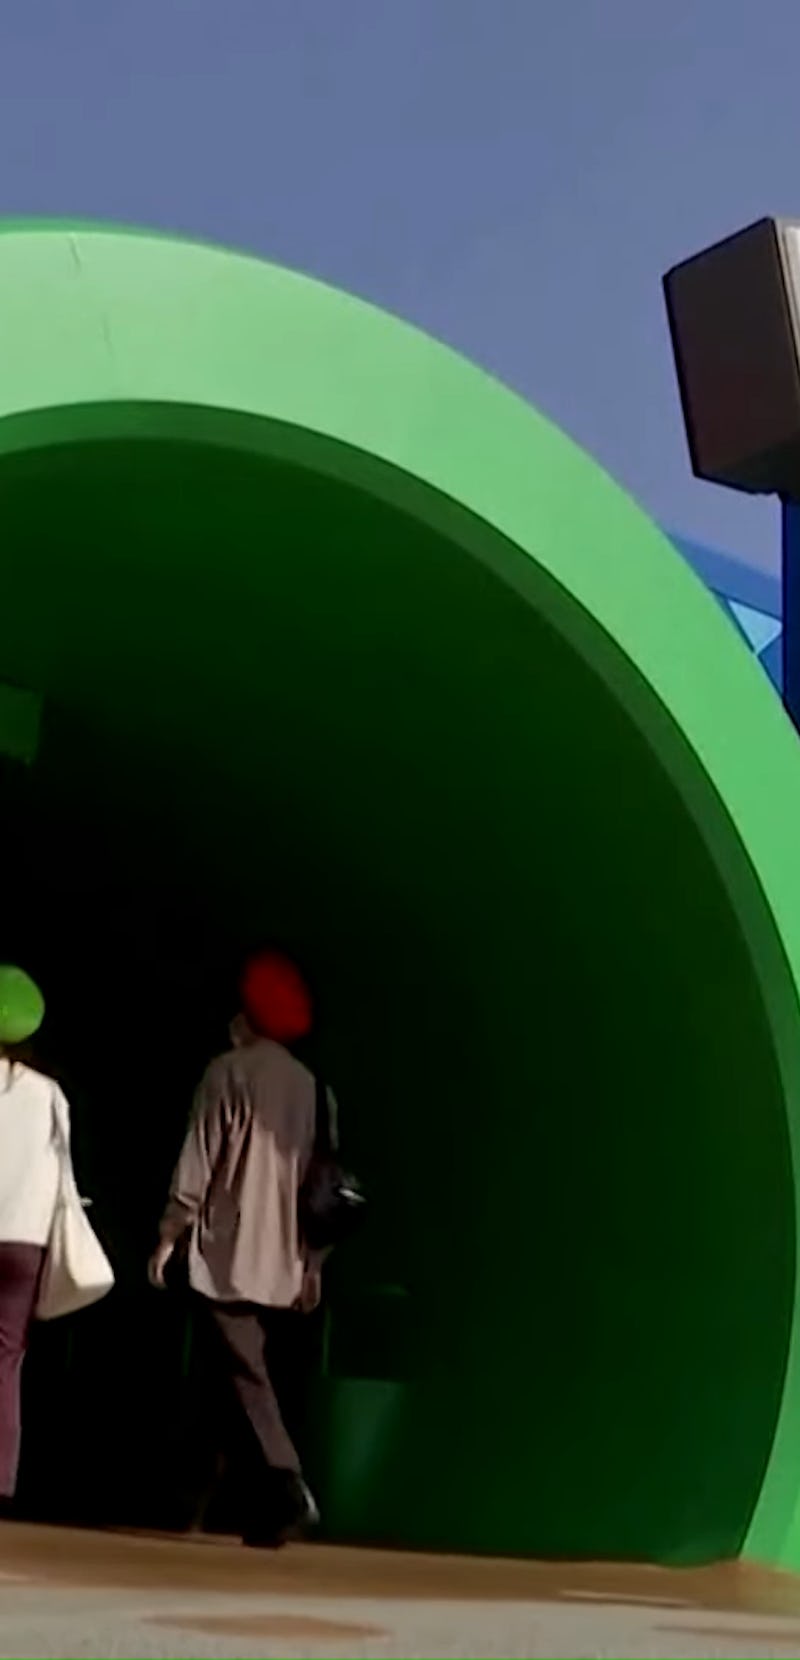 Two people enter a warp pipe